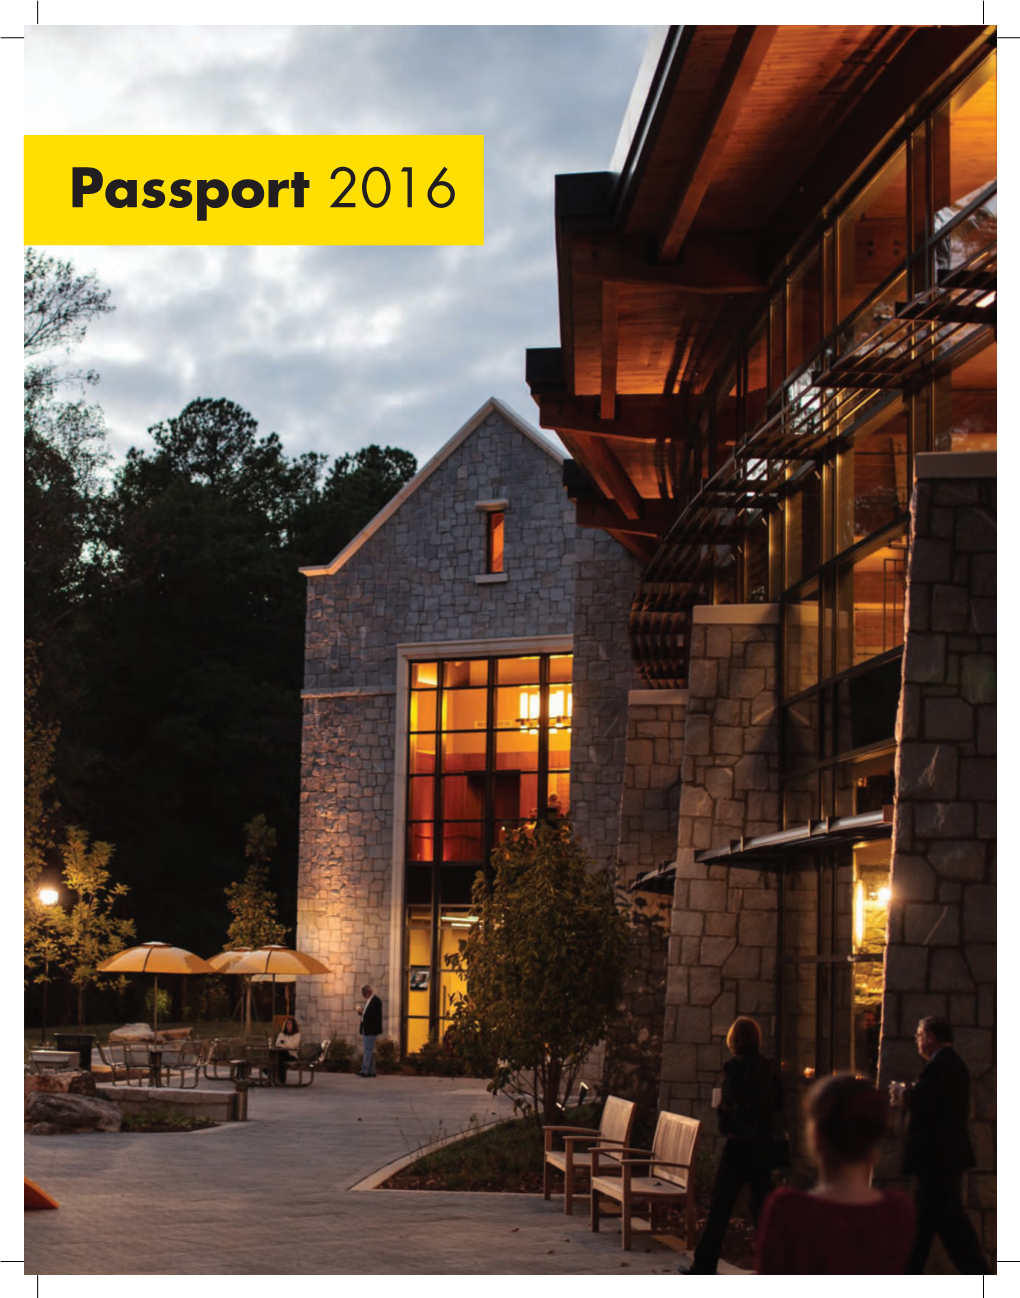 Passport 2016 to Find Orientation Schedules, Summer Information, Quick Links to Campus Services, and More, Visit Our First Year Experience Website: Fye.Oglethorpe.Edu